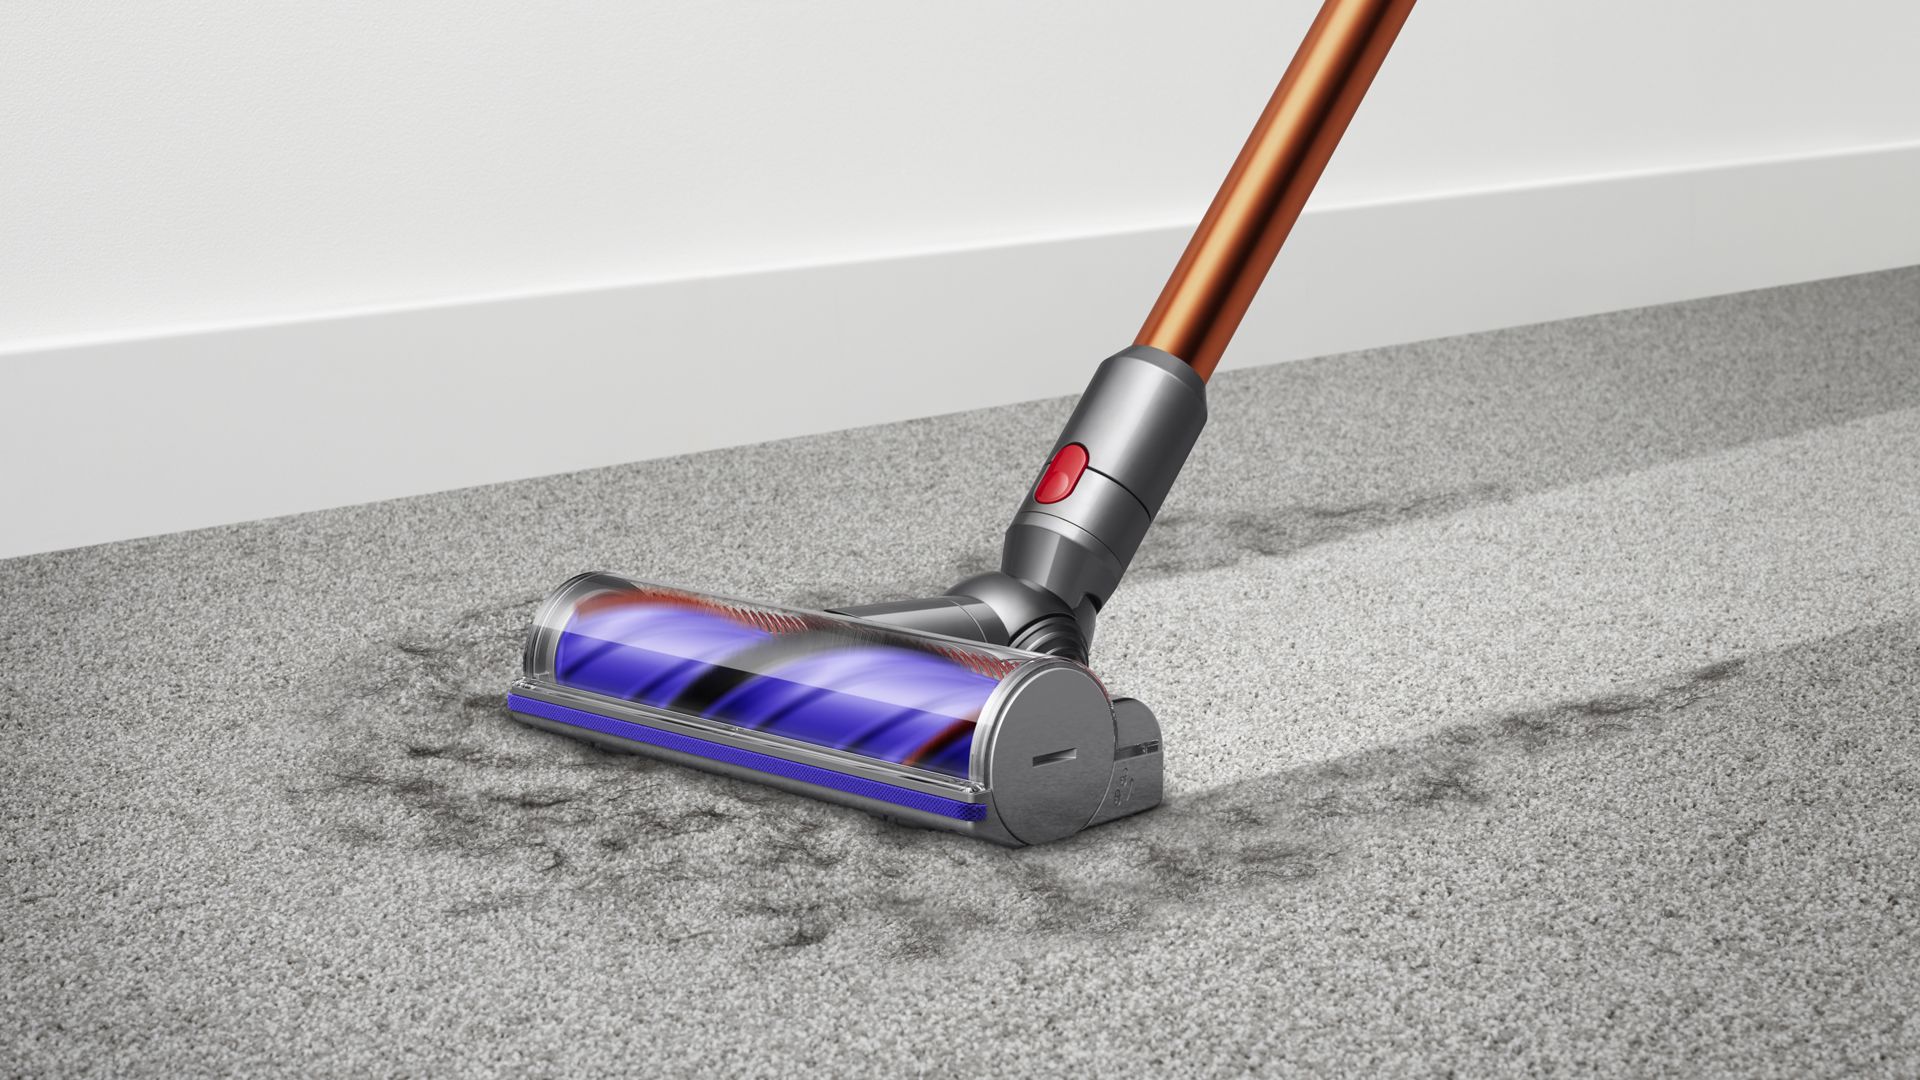 https://dyson-h.assetsadobe2.com/is/image/content/dam/dyson/products/cord-free-vacuums/sticks/range-reset-2022/v10/pdps/irsnkirco/343783-01-gallery-img-2-IRSNKIRCO-2022.jpg?&cropPathE=desktop&fit=stretch,1&fmt=pjpeg&wid=1920